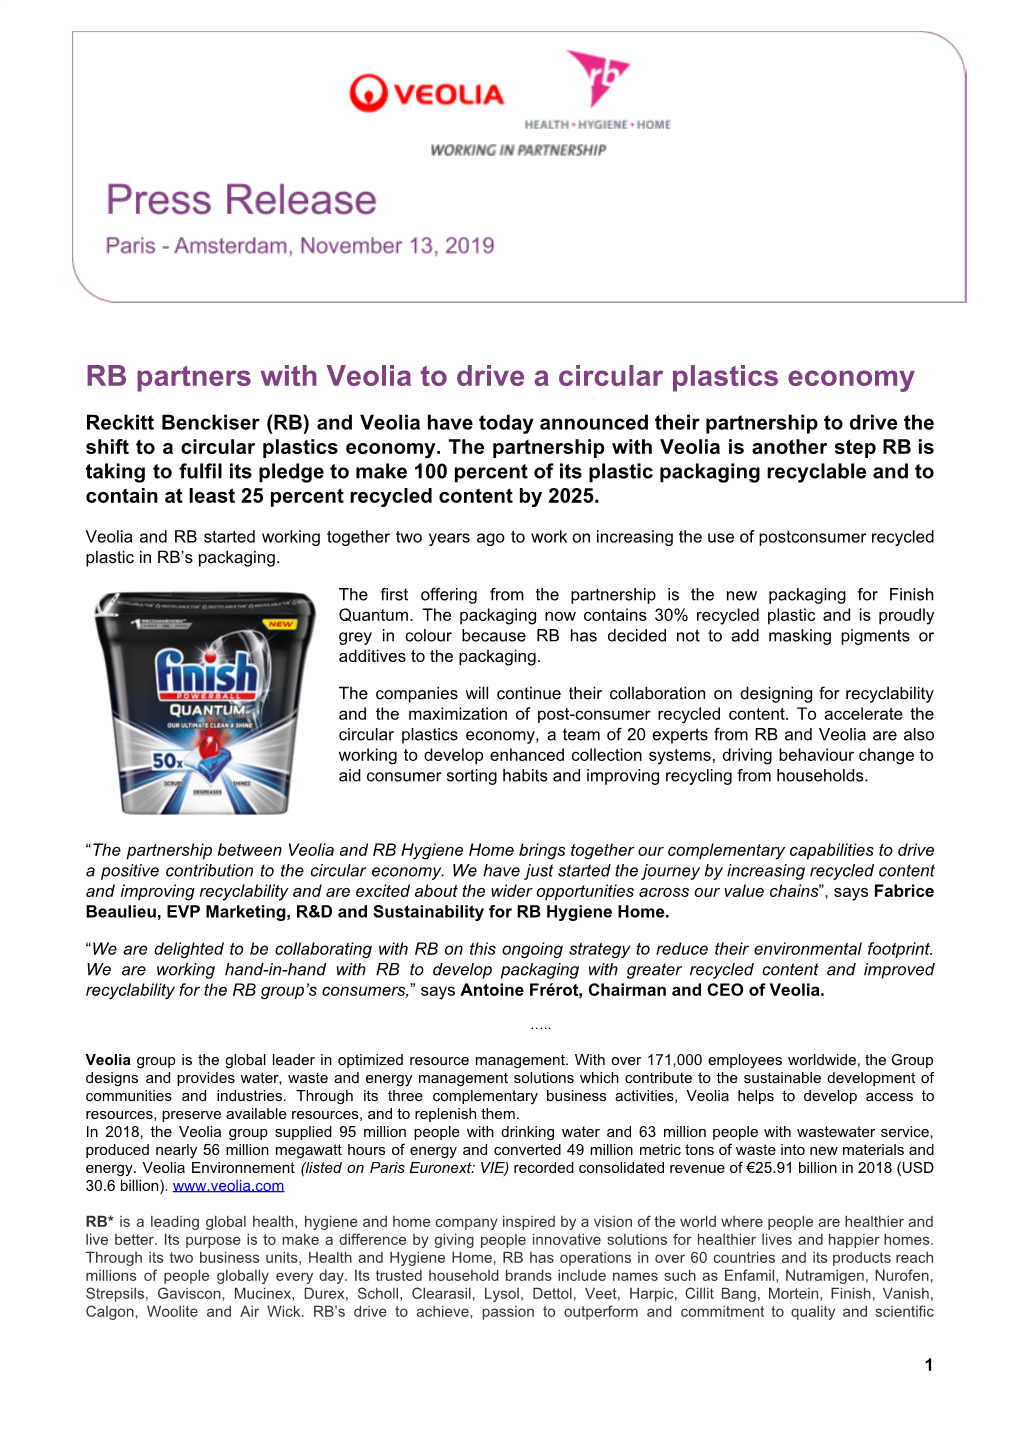 RB Partners with Veolia to Drive a Circular Plastics Economy